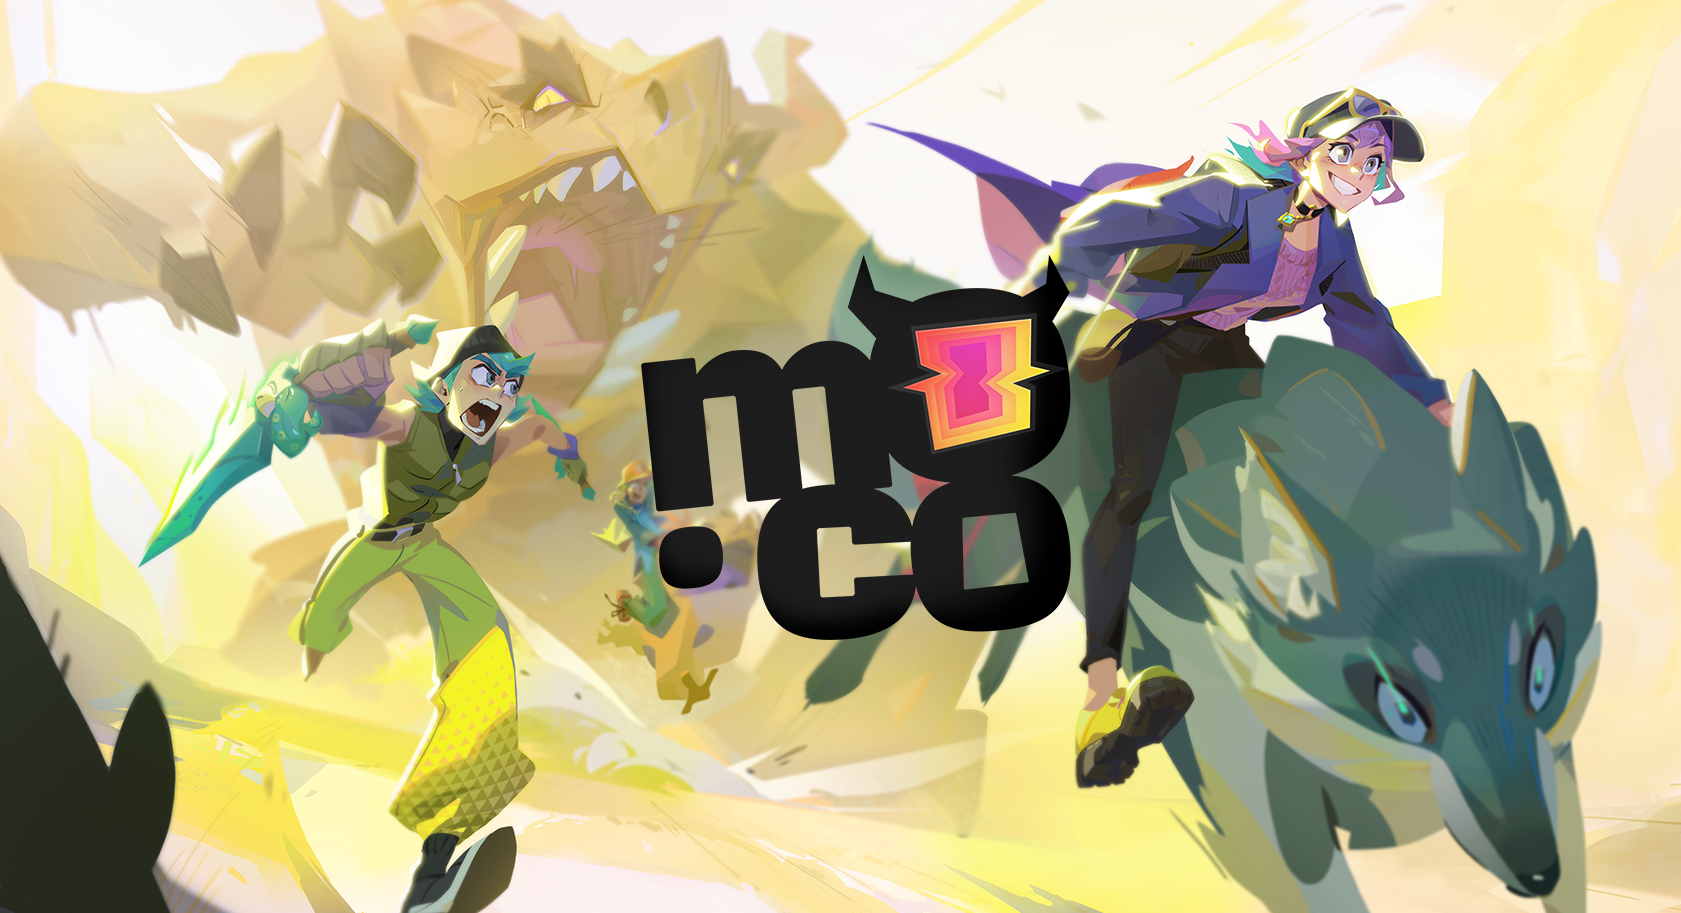 mo.co｜Pokémon Meets Monster Hunter in Supercell’s Upcoming MMO